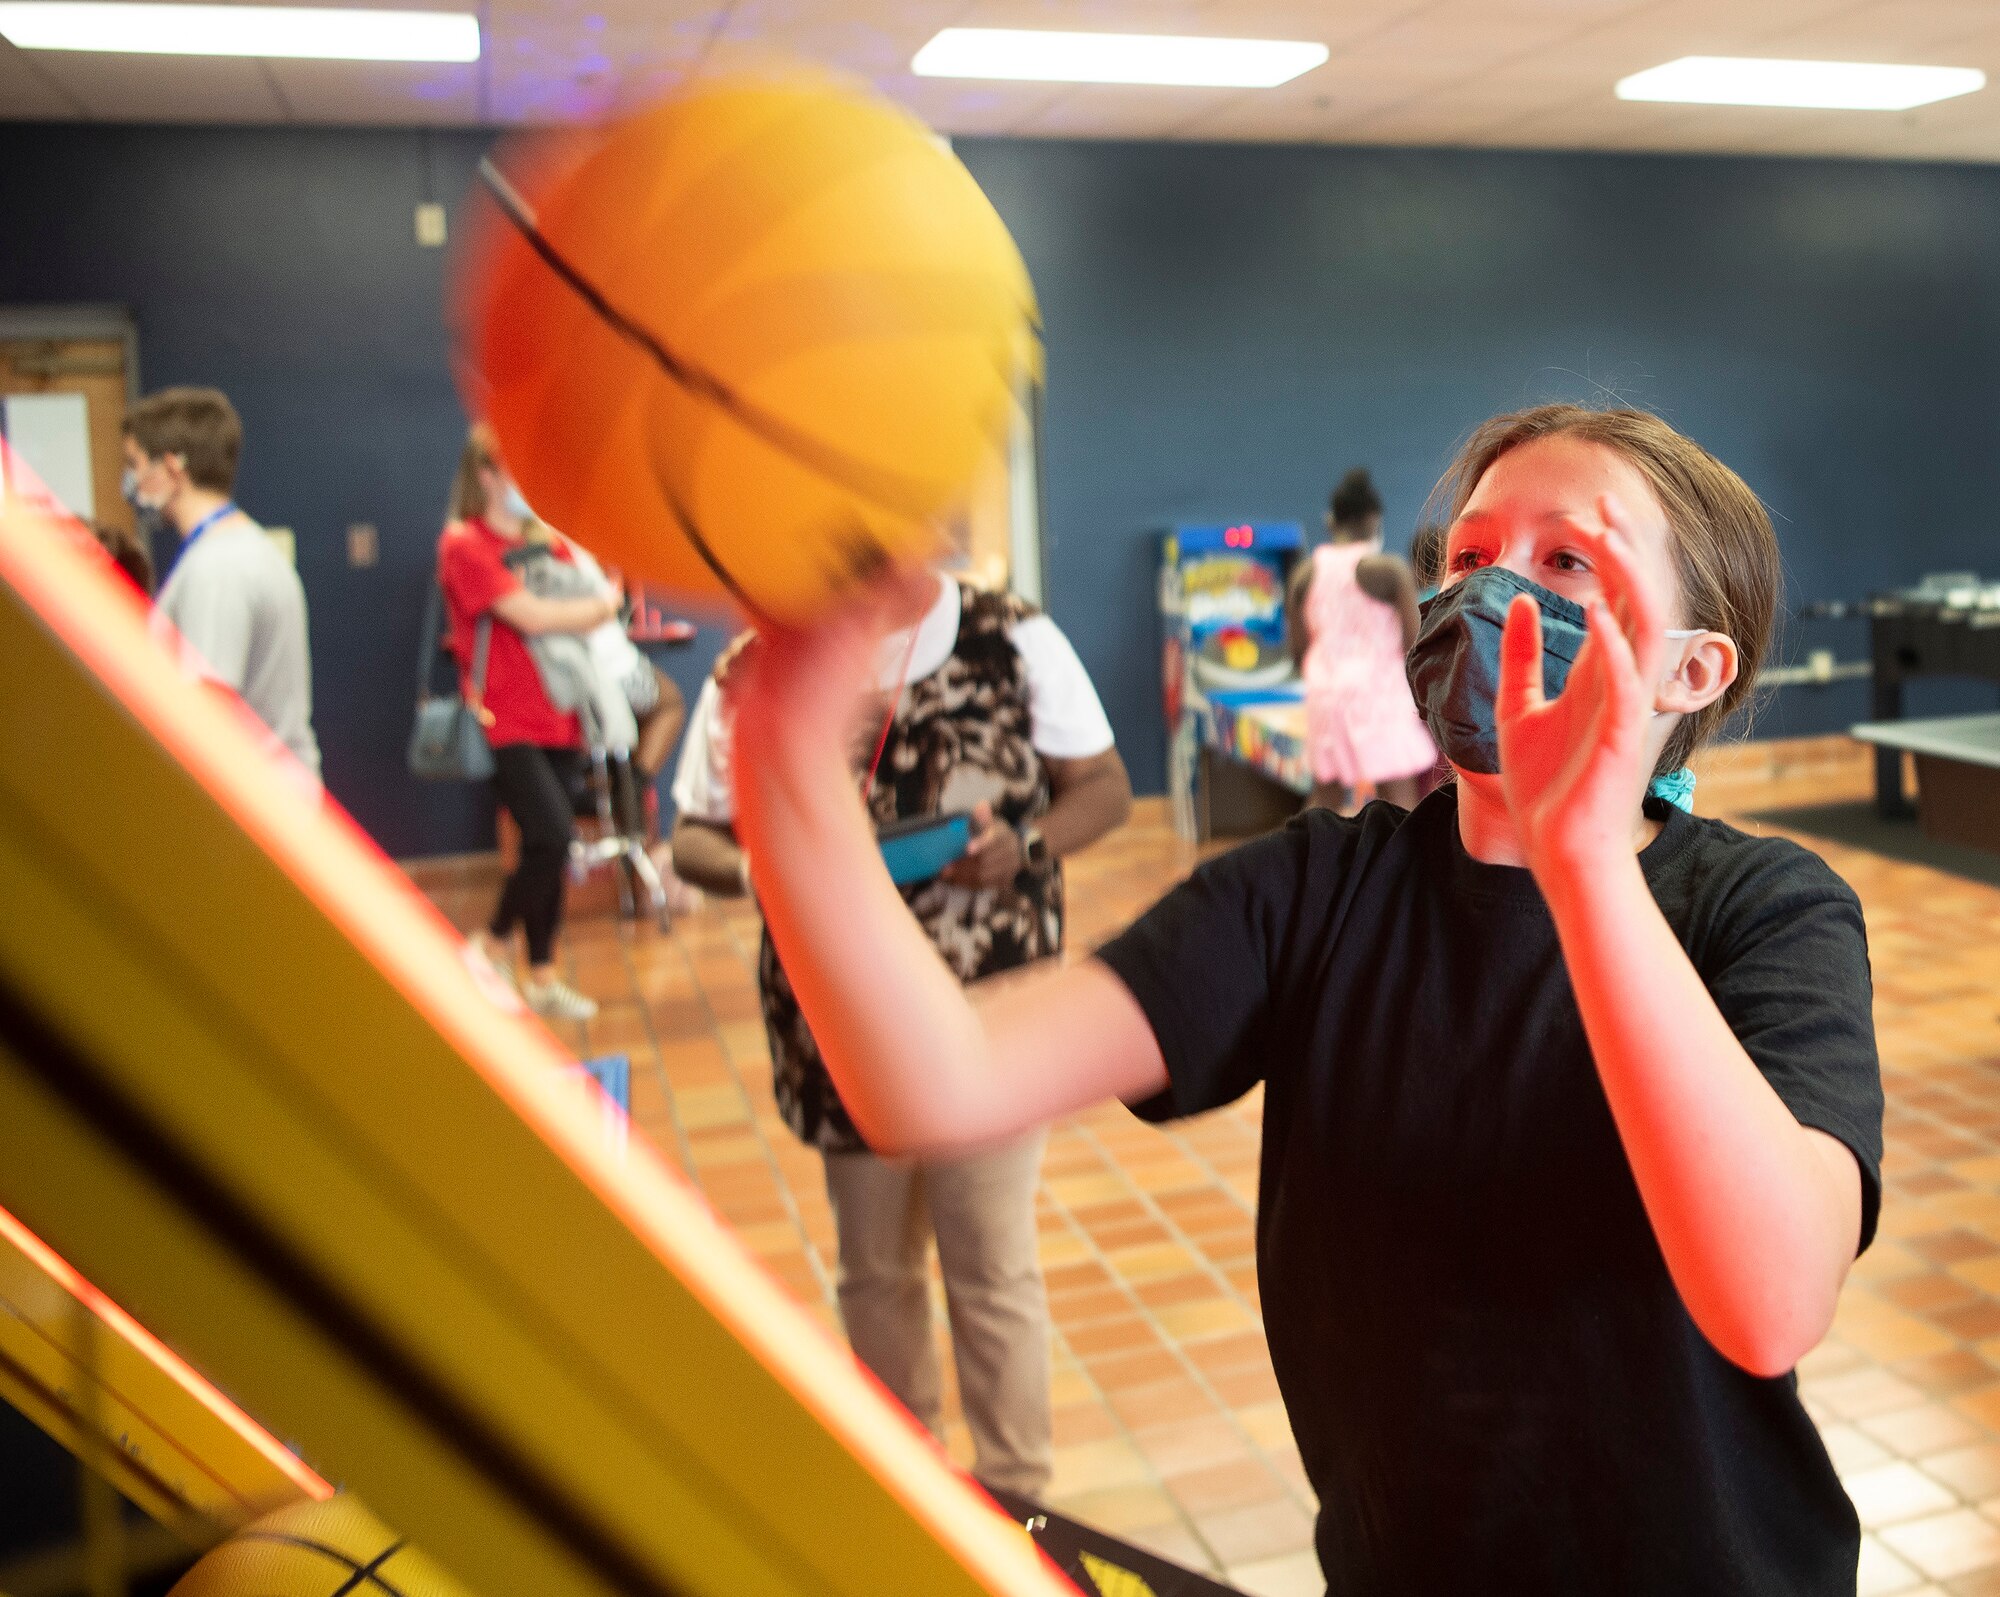 Evelyn Wilbern, 12, tries to beat the clock as she shoots baskets in the new Prairies Youth Center game room at Wright-Patterson Air Force Base, Ohio, on June 10, 2021. The venue, which features free arcade games, is having its grand opening June 18. (U.S. Air Force photo by R.J. Oriez